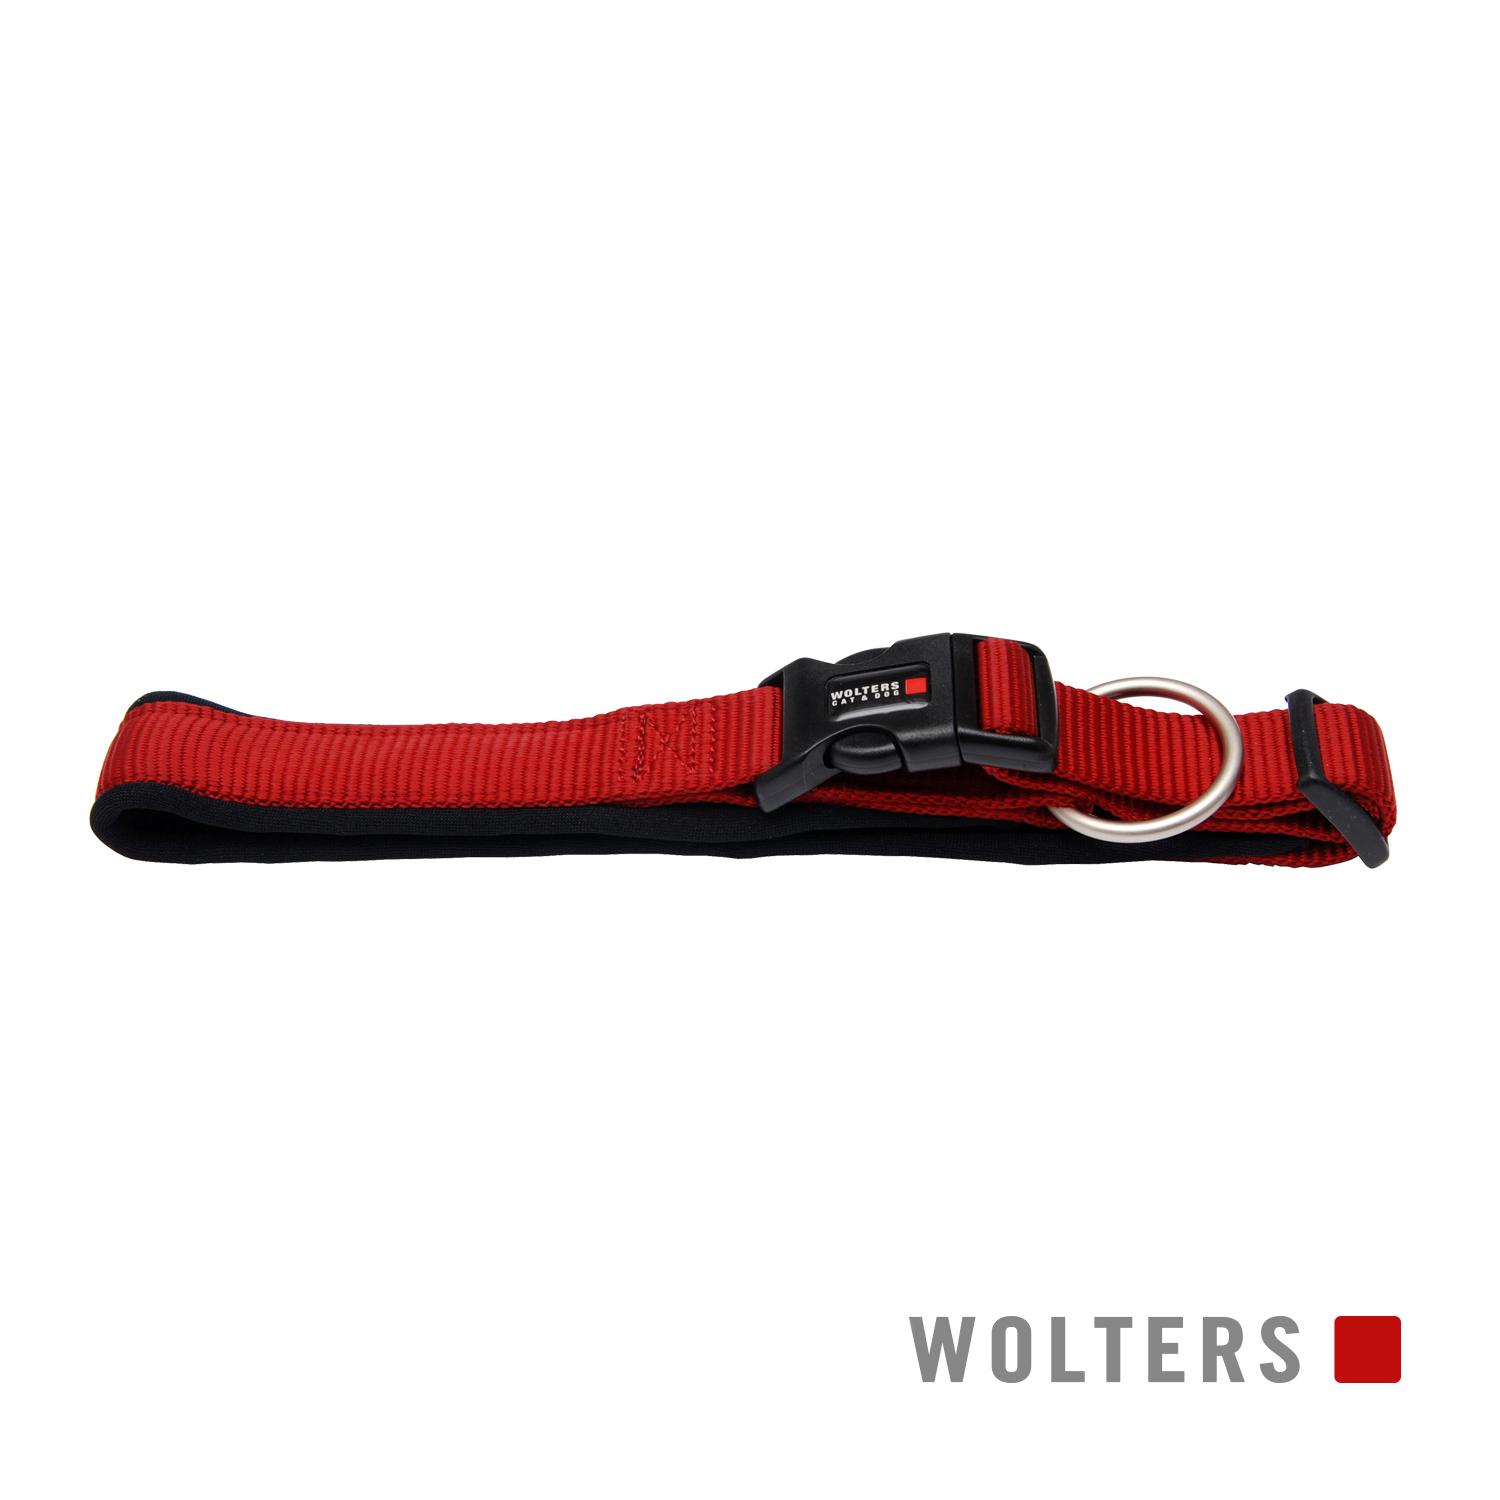 Wolters Halsband Professional Comfort Rot/Schwarz 25-30cm x 15mm